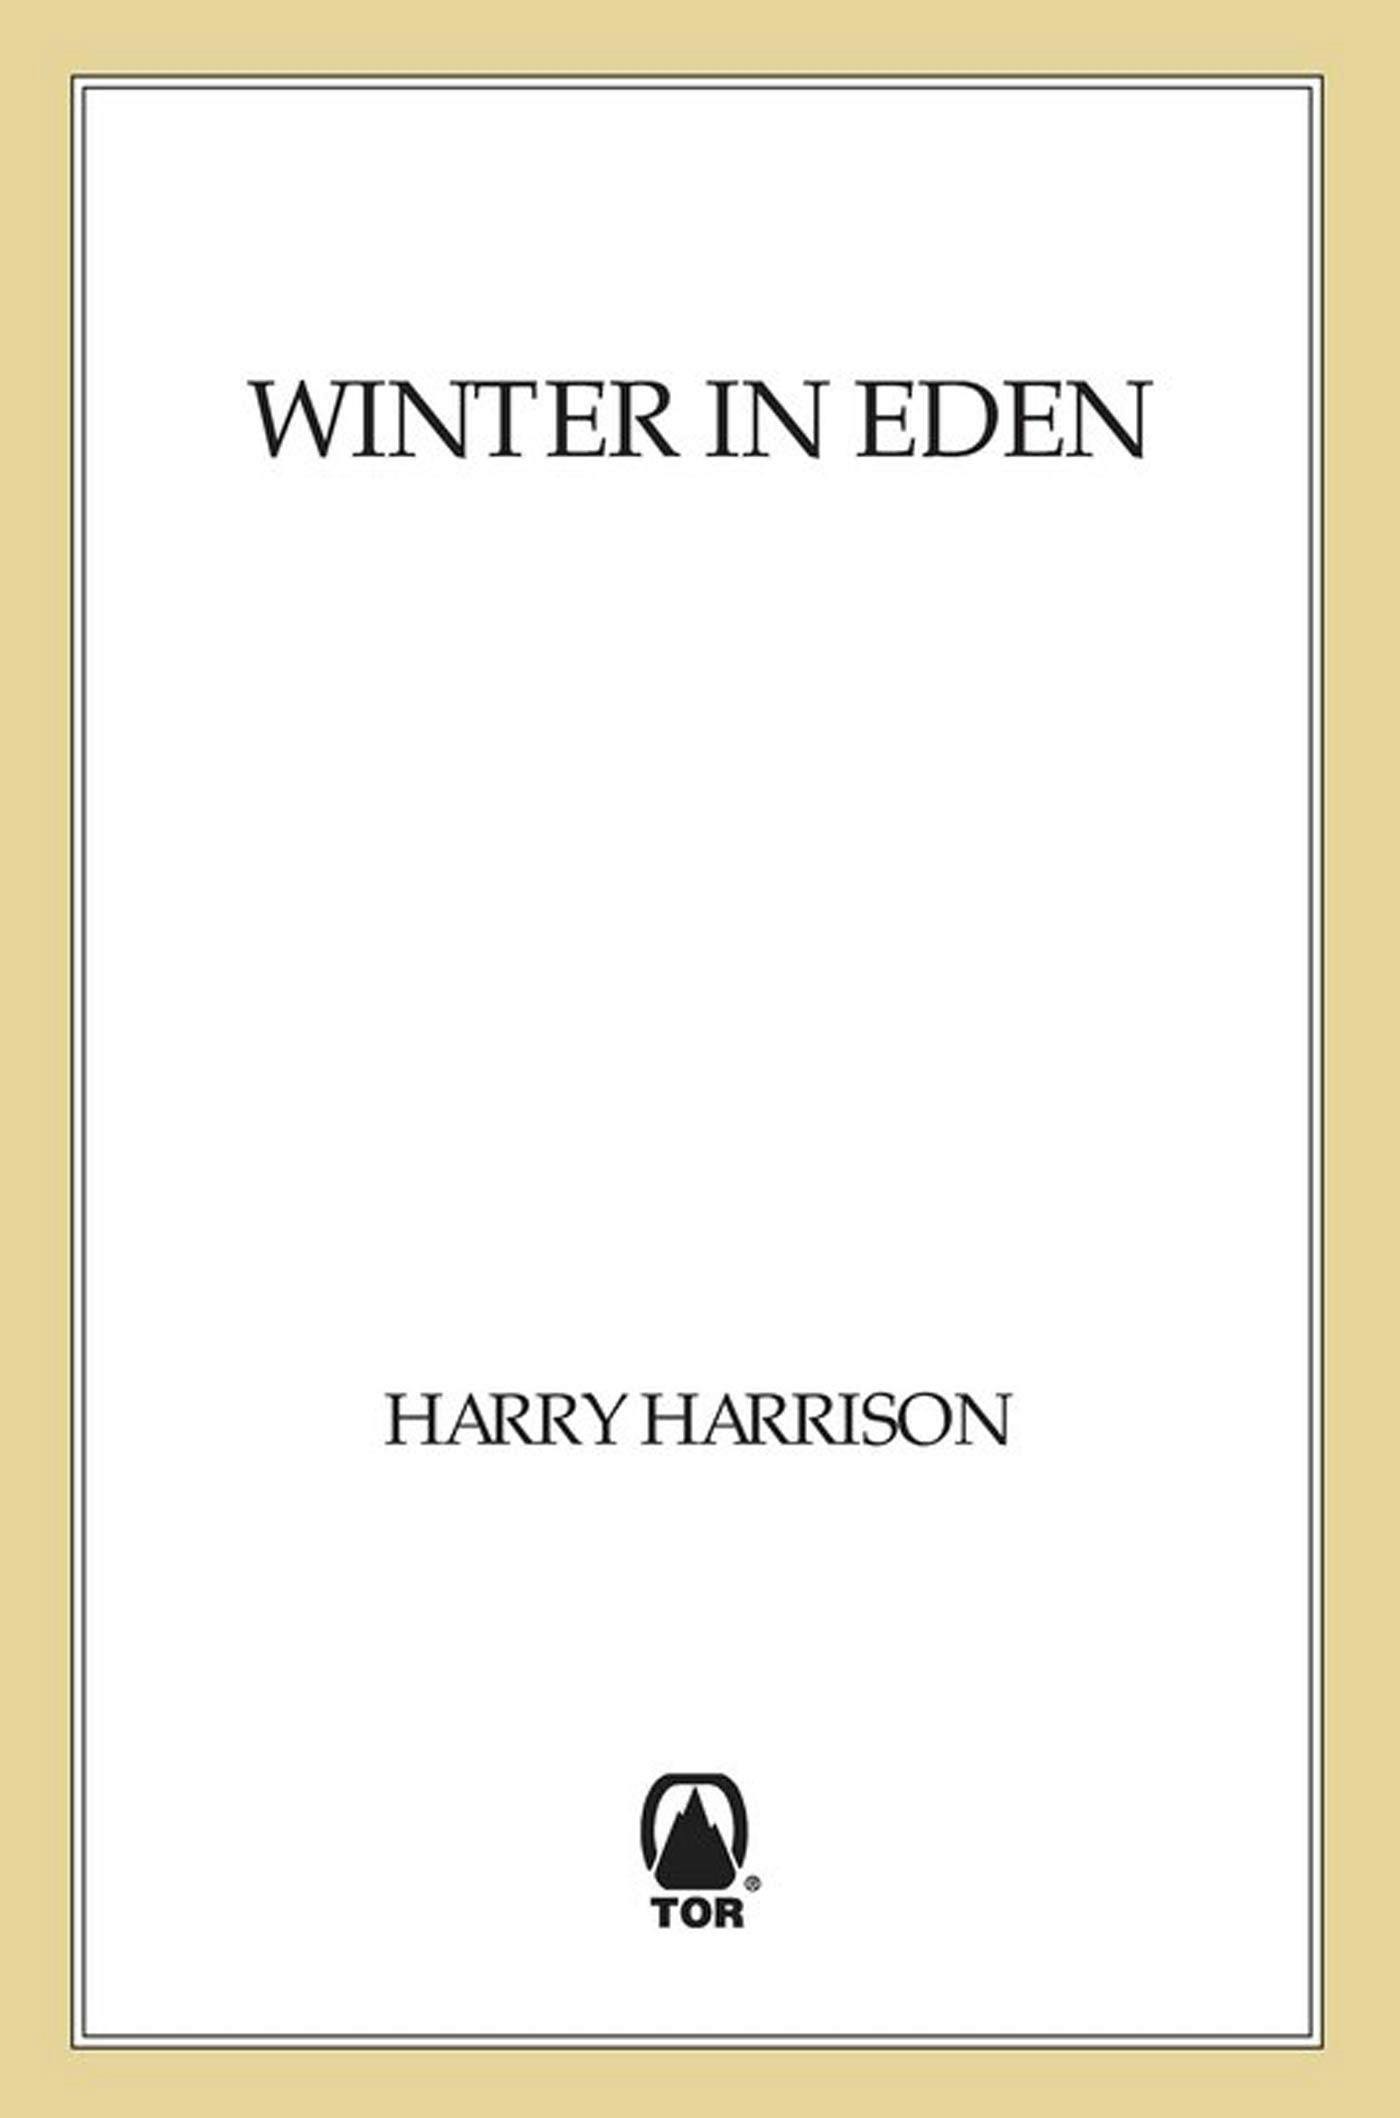 Cover for the book titled as: Winter in Eden